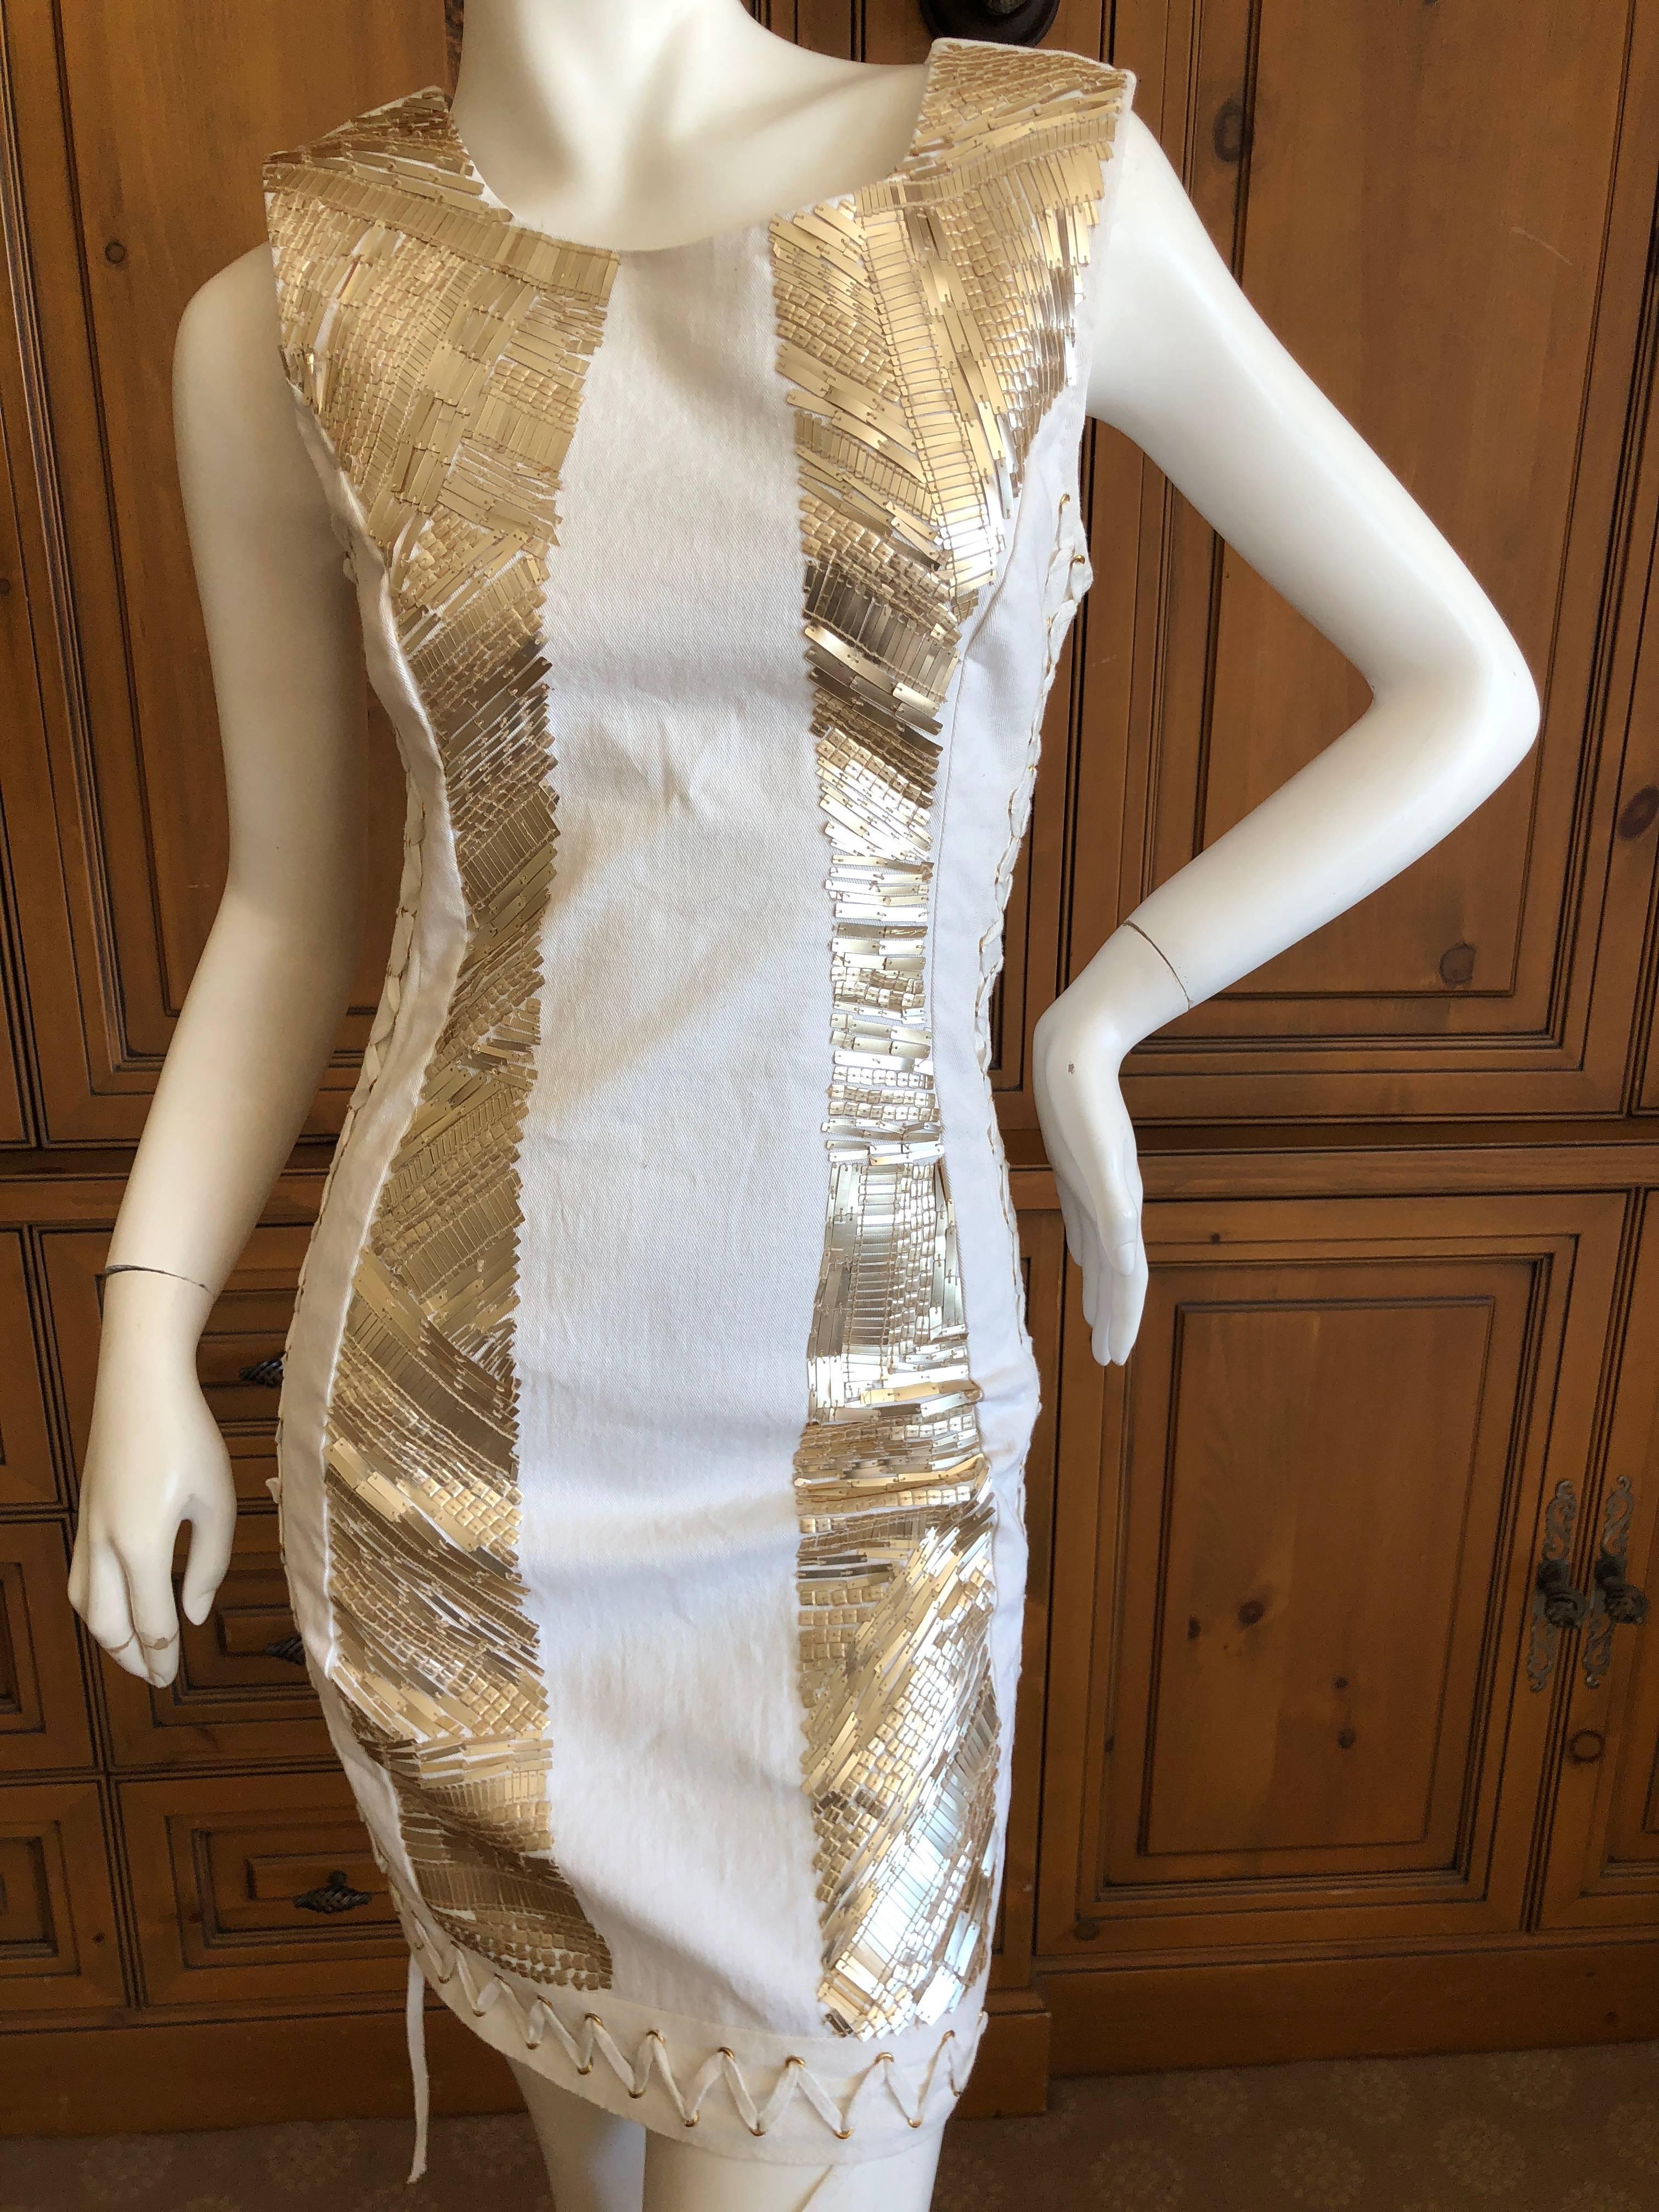 Pierre Balmain Sexy Ivory Sequin Embellished Dress with Corset Lace Details.
Designed by Olivier Rousting with corset lacing up the sides and matte gold sequins.
New with tags.

 Size 36 
Bust 36